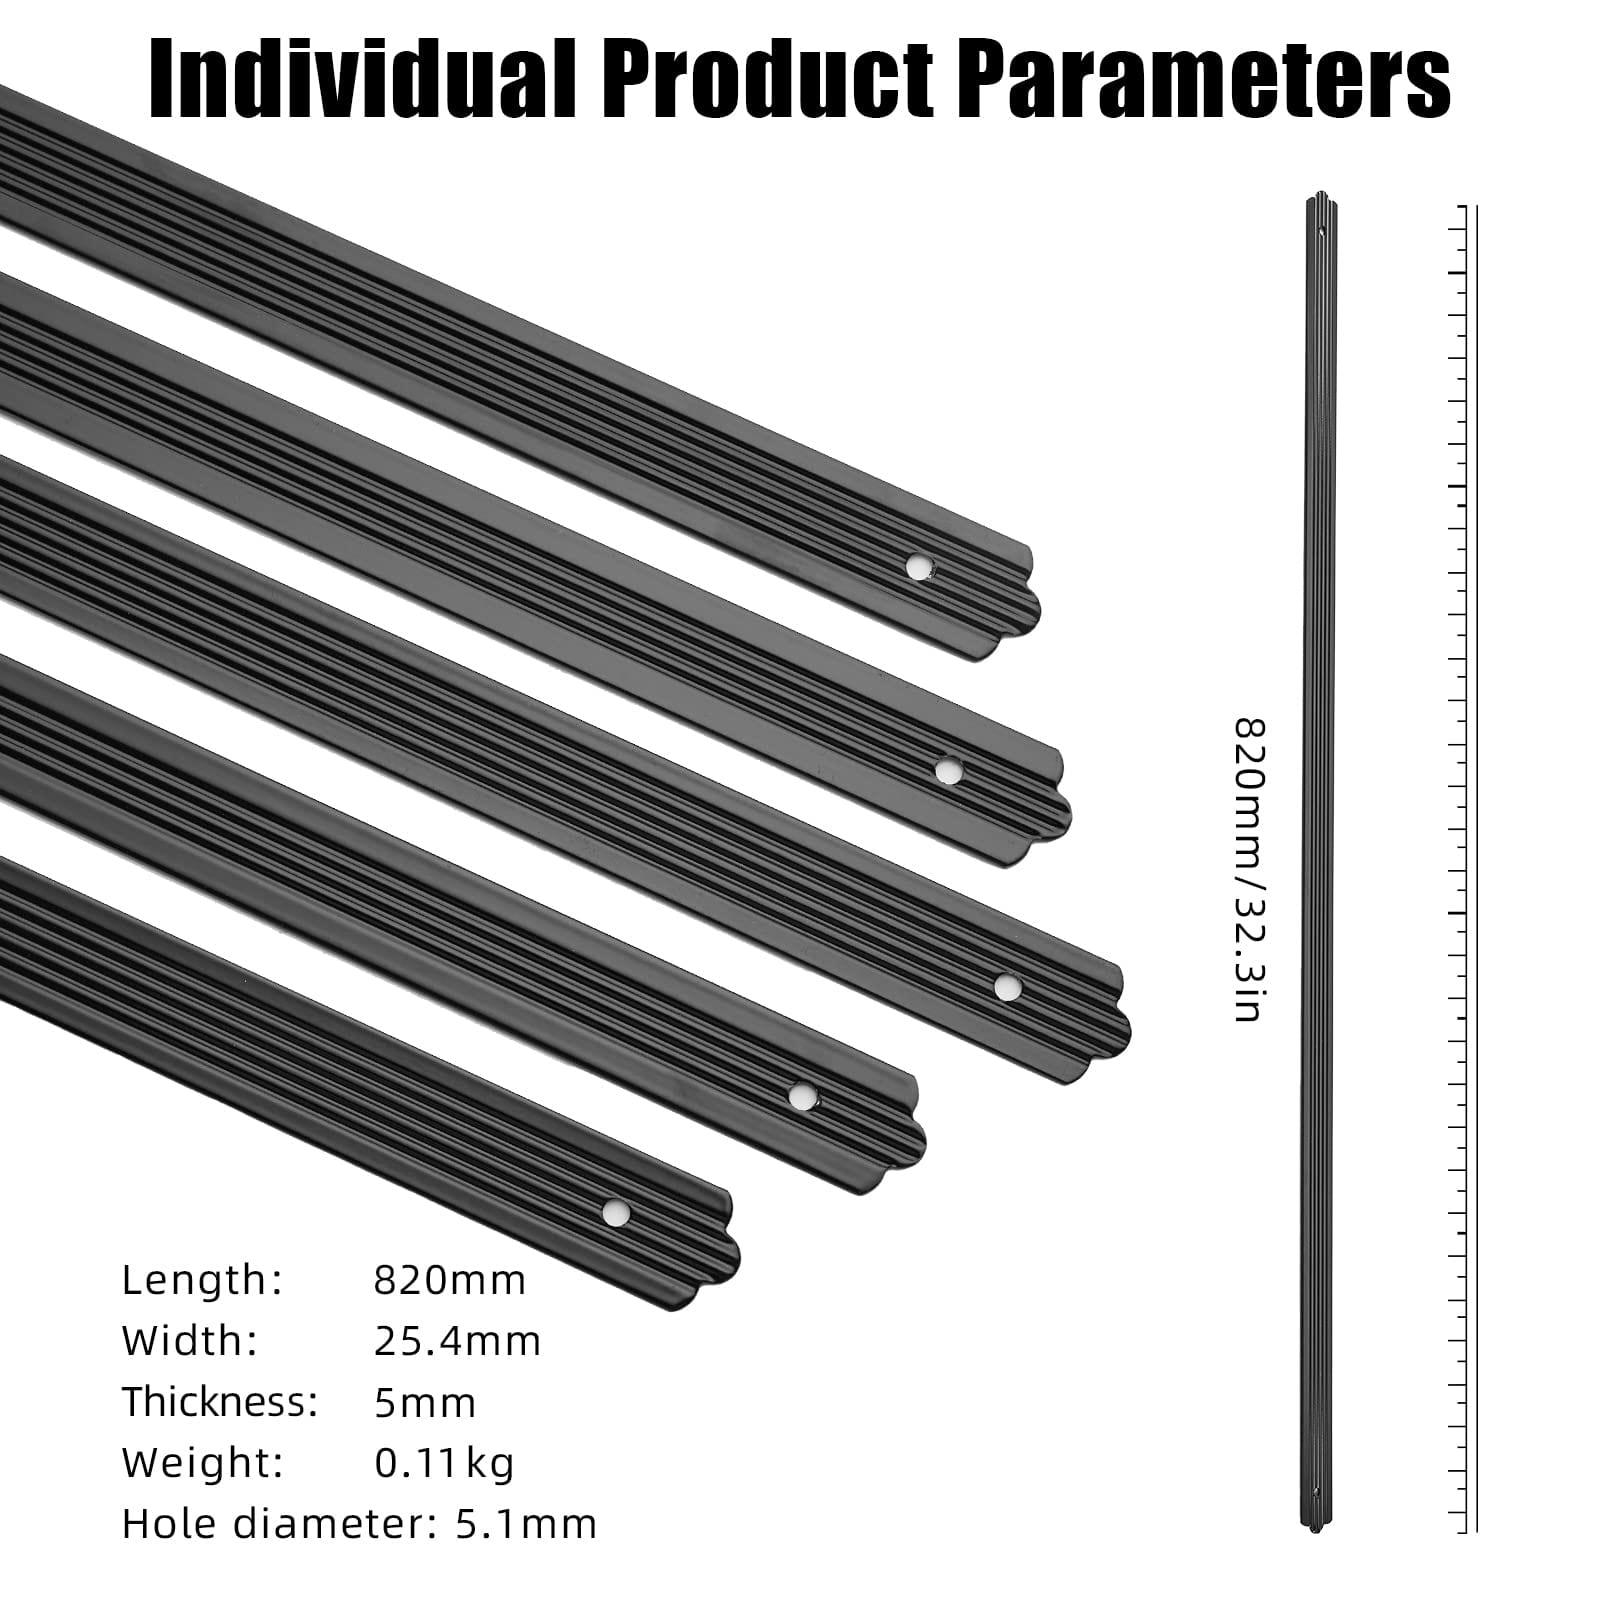 Aluminum Balusters 32.25x1x0.1 Inch, Black for Porch & Deck